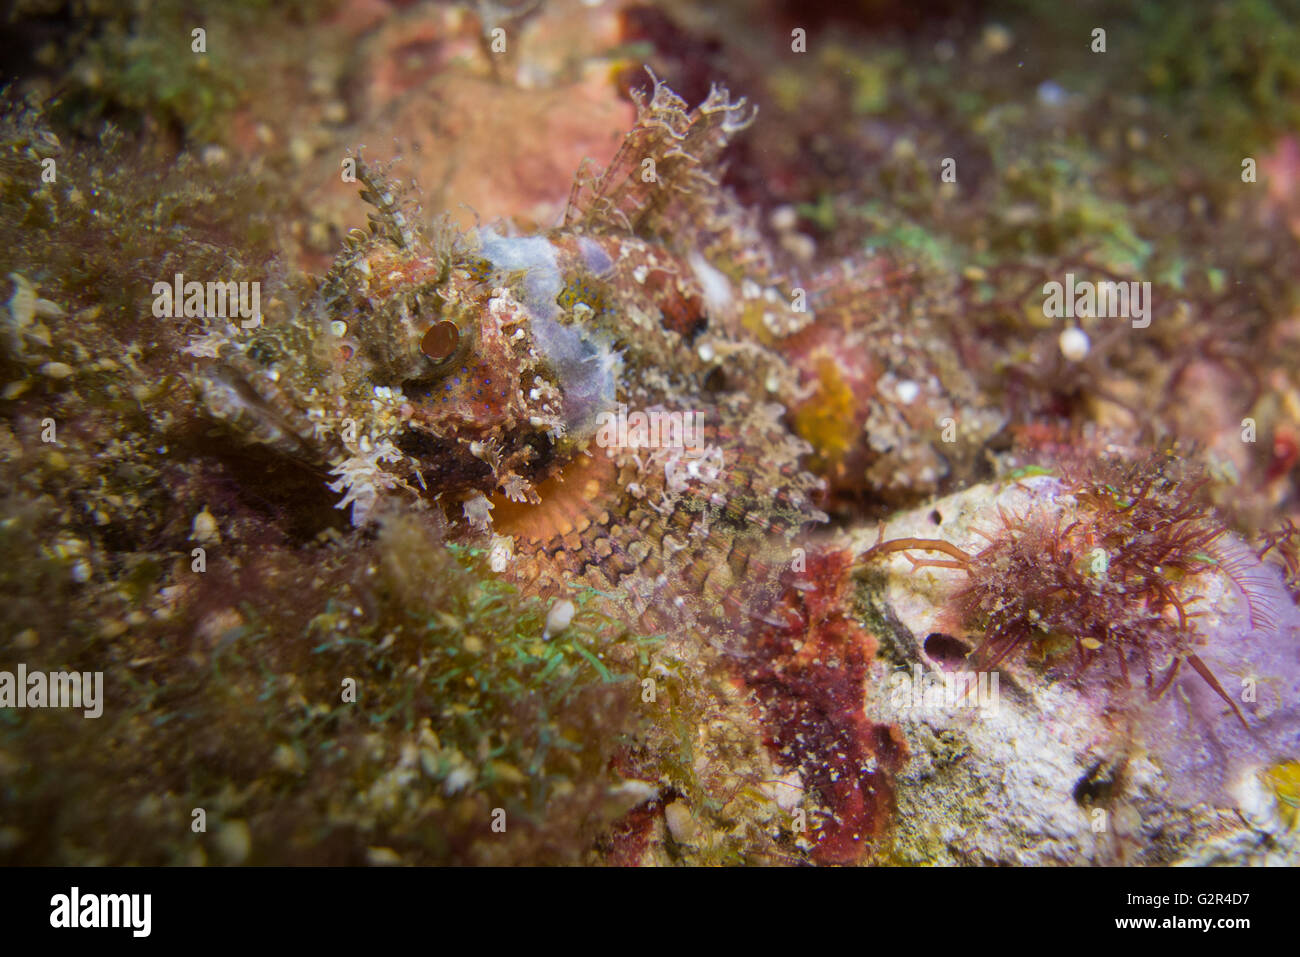 Scorpionfish, Scorpaenaopsis spec. , from the South China Sea, Coral Triangle, Brunei Darussalam. Stock Photo